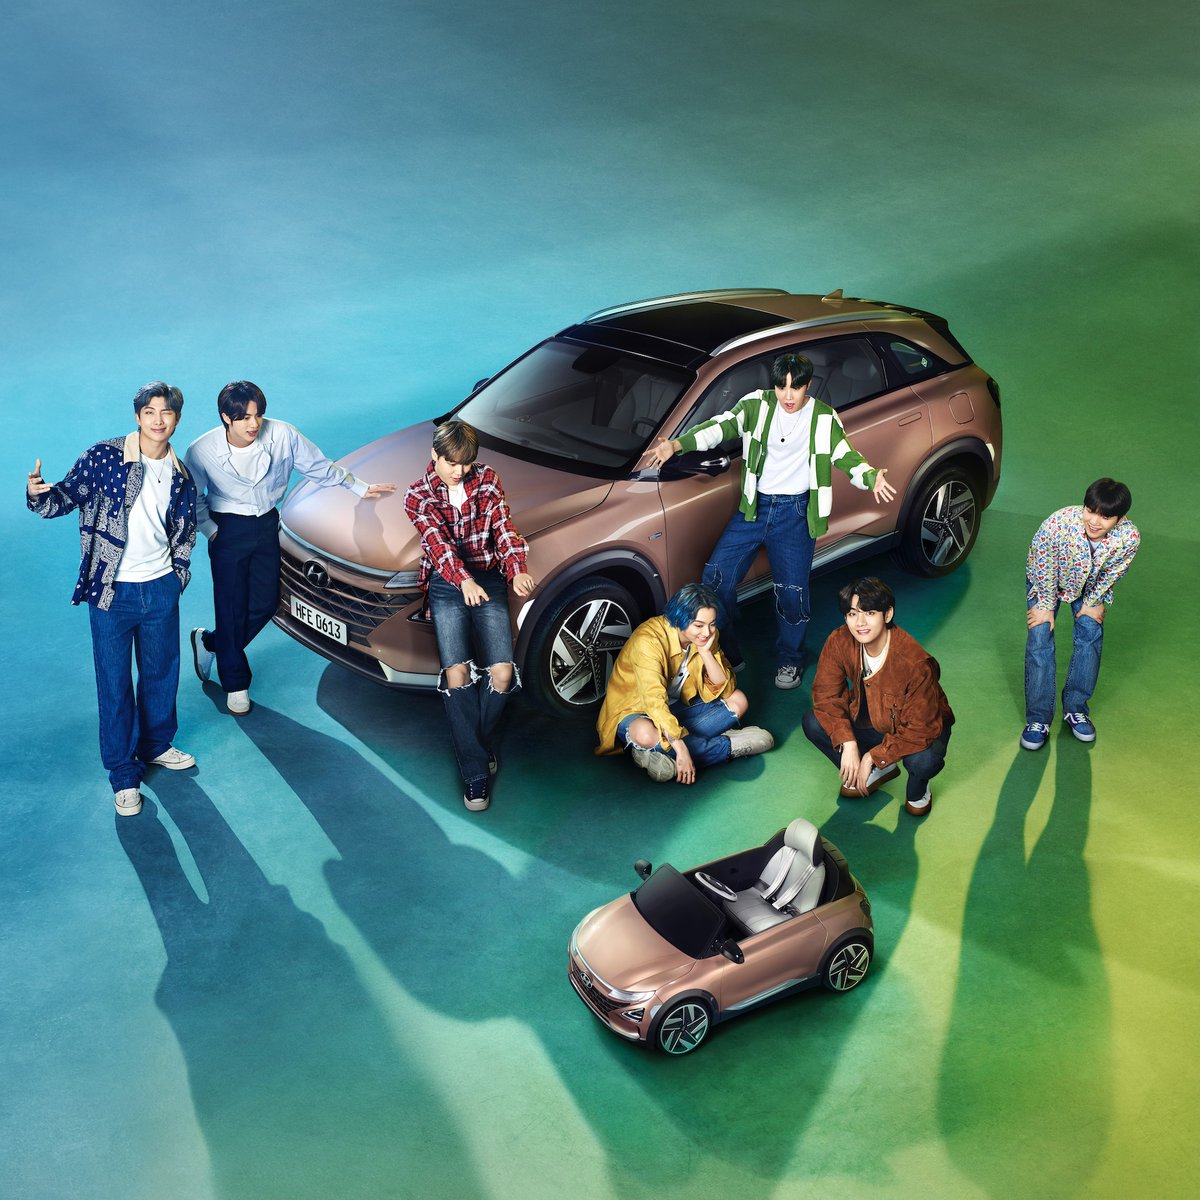 So cute! What happens when @bts_bighit meet the Kids' NEXO? Stay tuned and find out very soon!
#Hyundai #NEXO #KidsNEXO #SustainableLiving